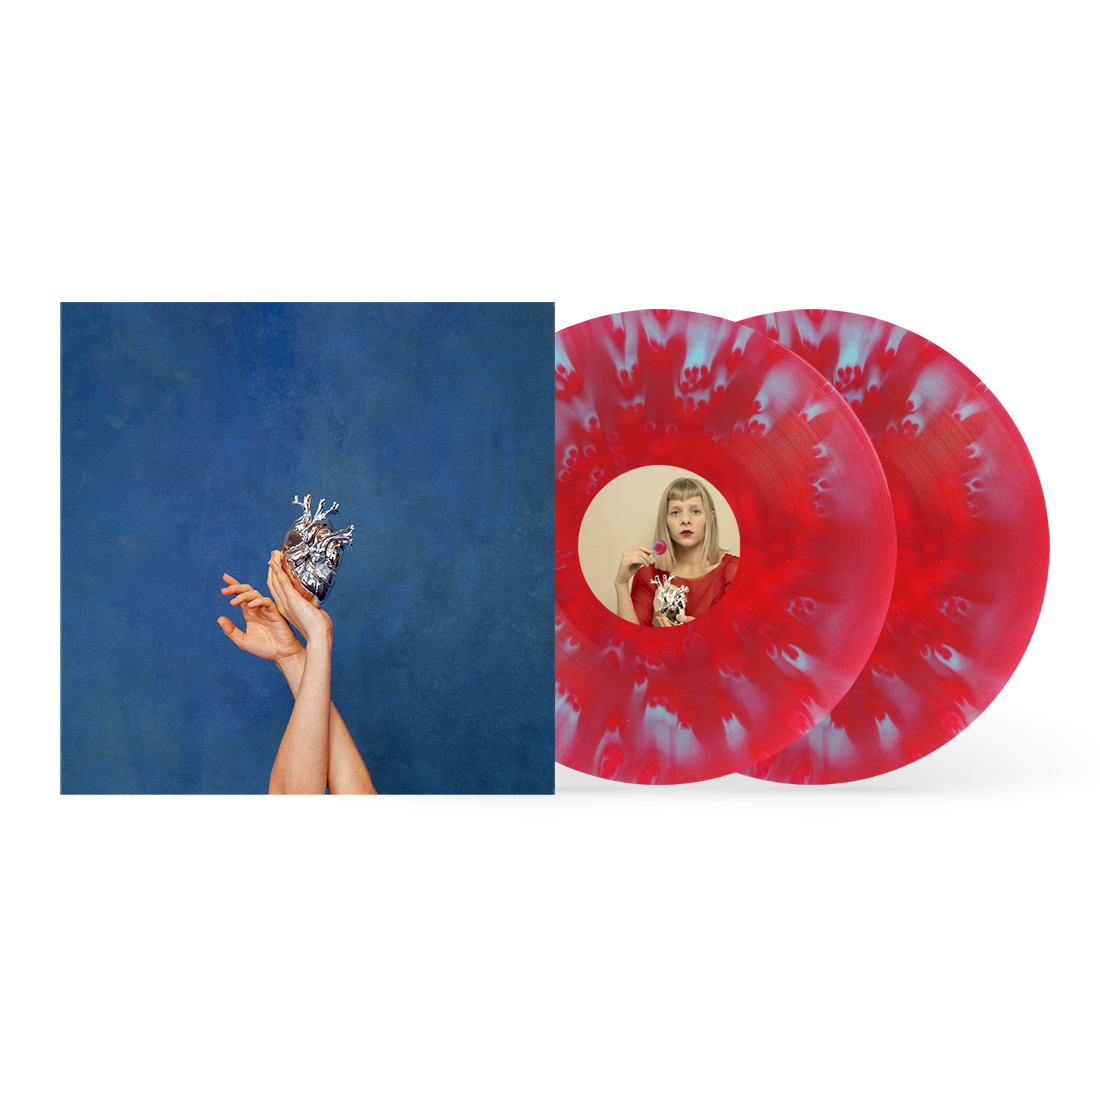 What Happened To The Heart? Limited Red/Blue Vinyl 2LP, Black Vinyl 2LP + Signed Art Card